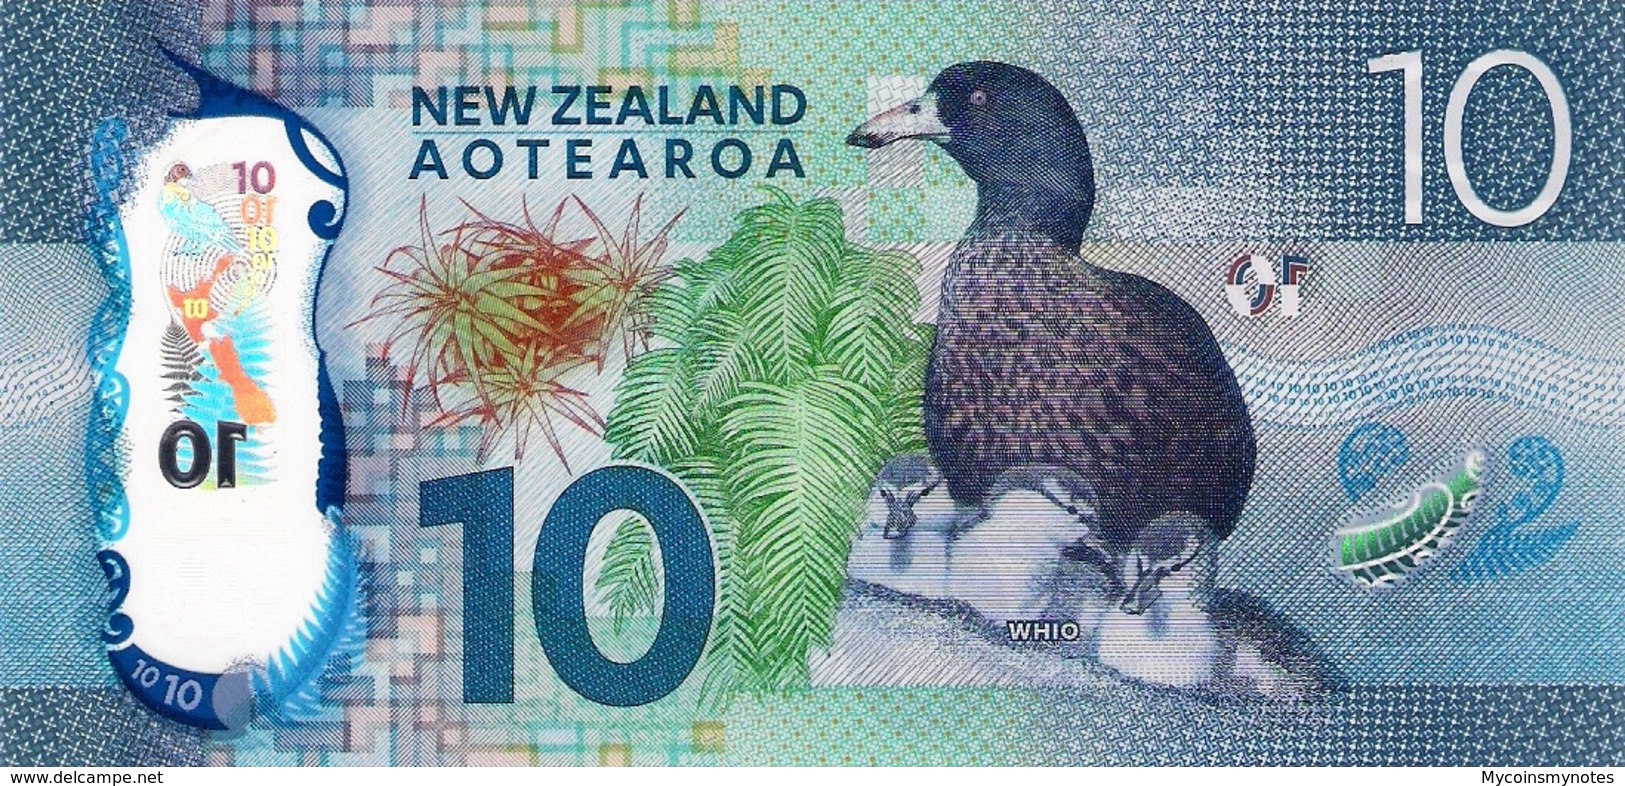 NEW ZEALAND 10 Dollars Banknote, 2015, P192, UNC, Kate Sheppard & Whio, Polymer - New Zealand